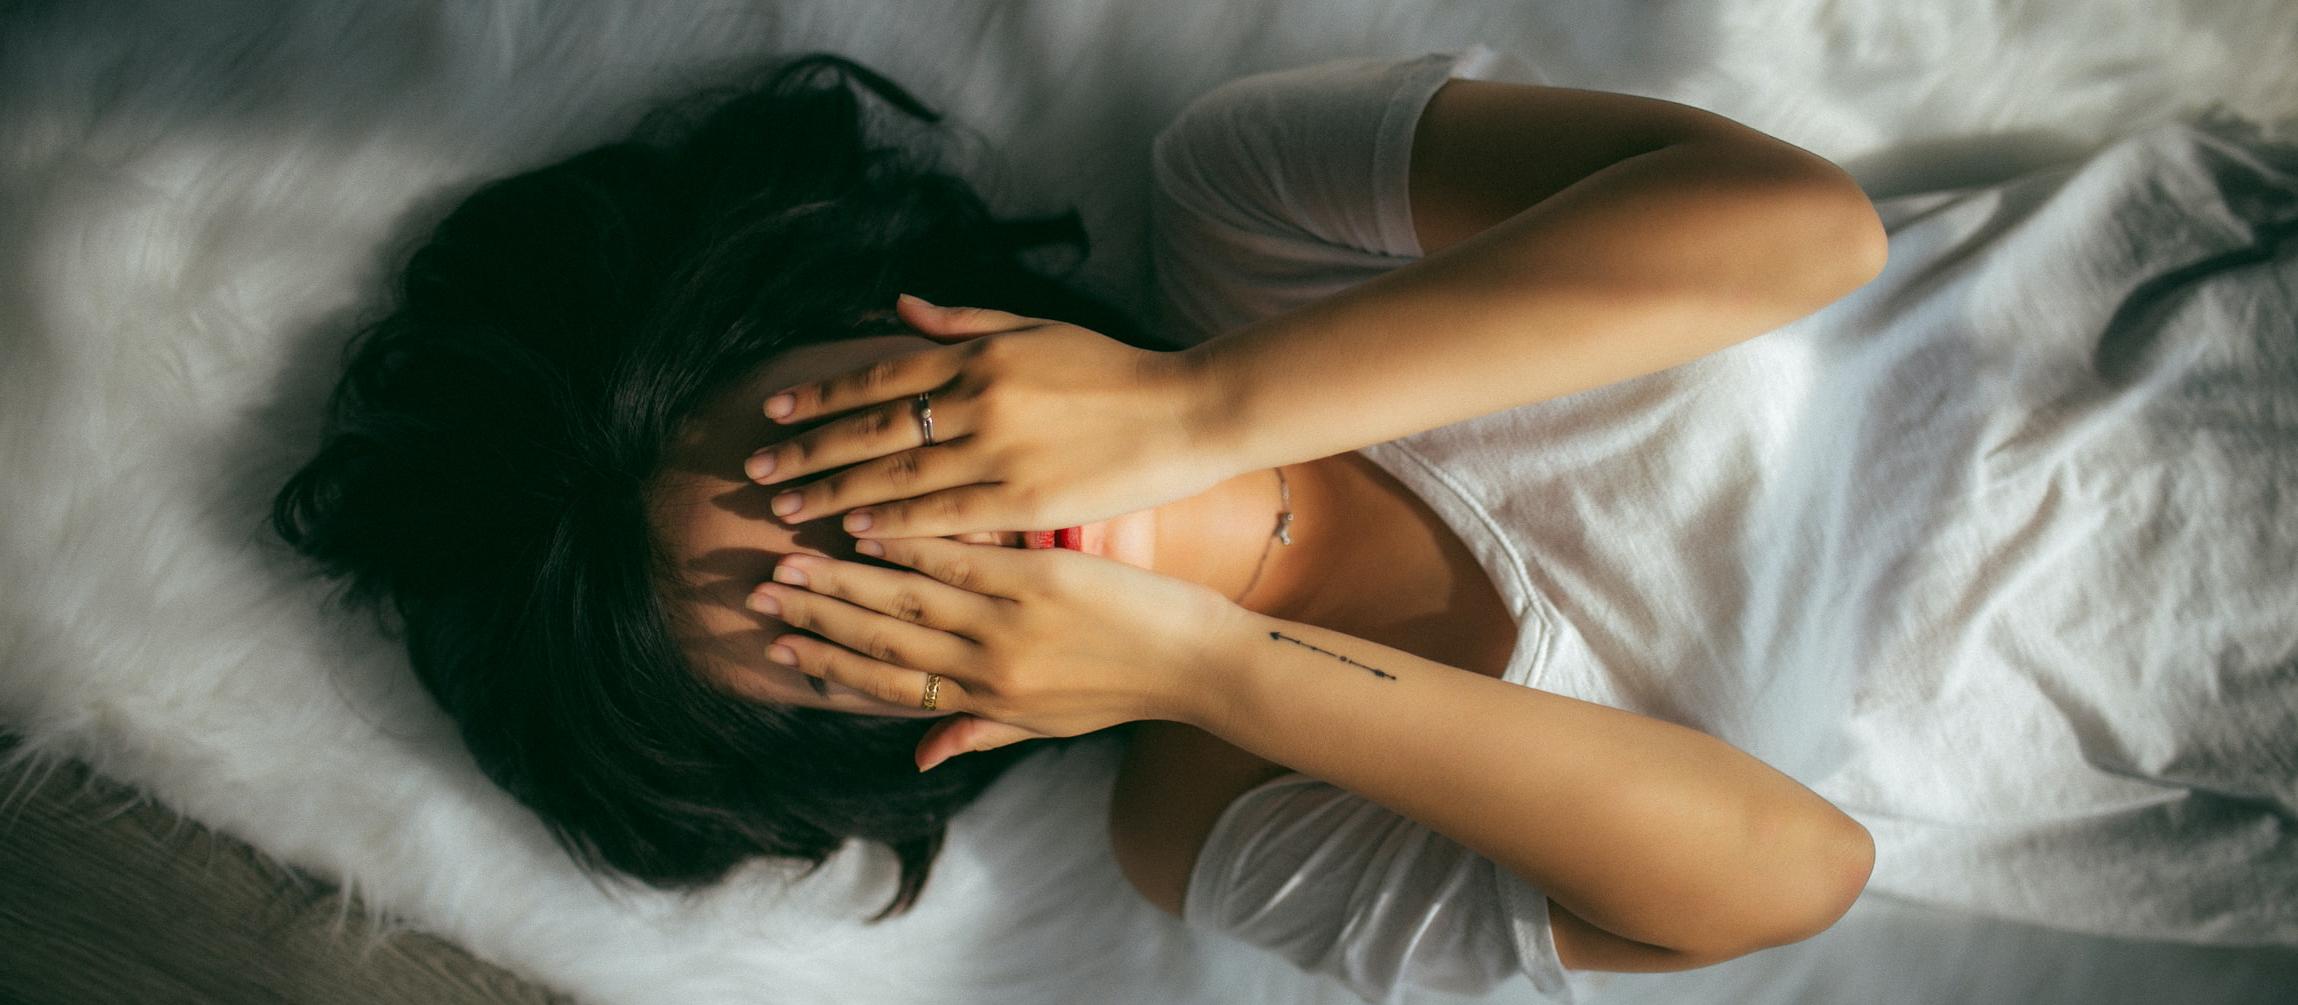 Embarrassed young woman covering face - unsplash.com 